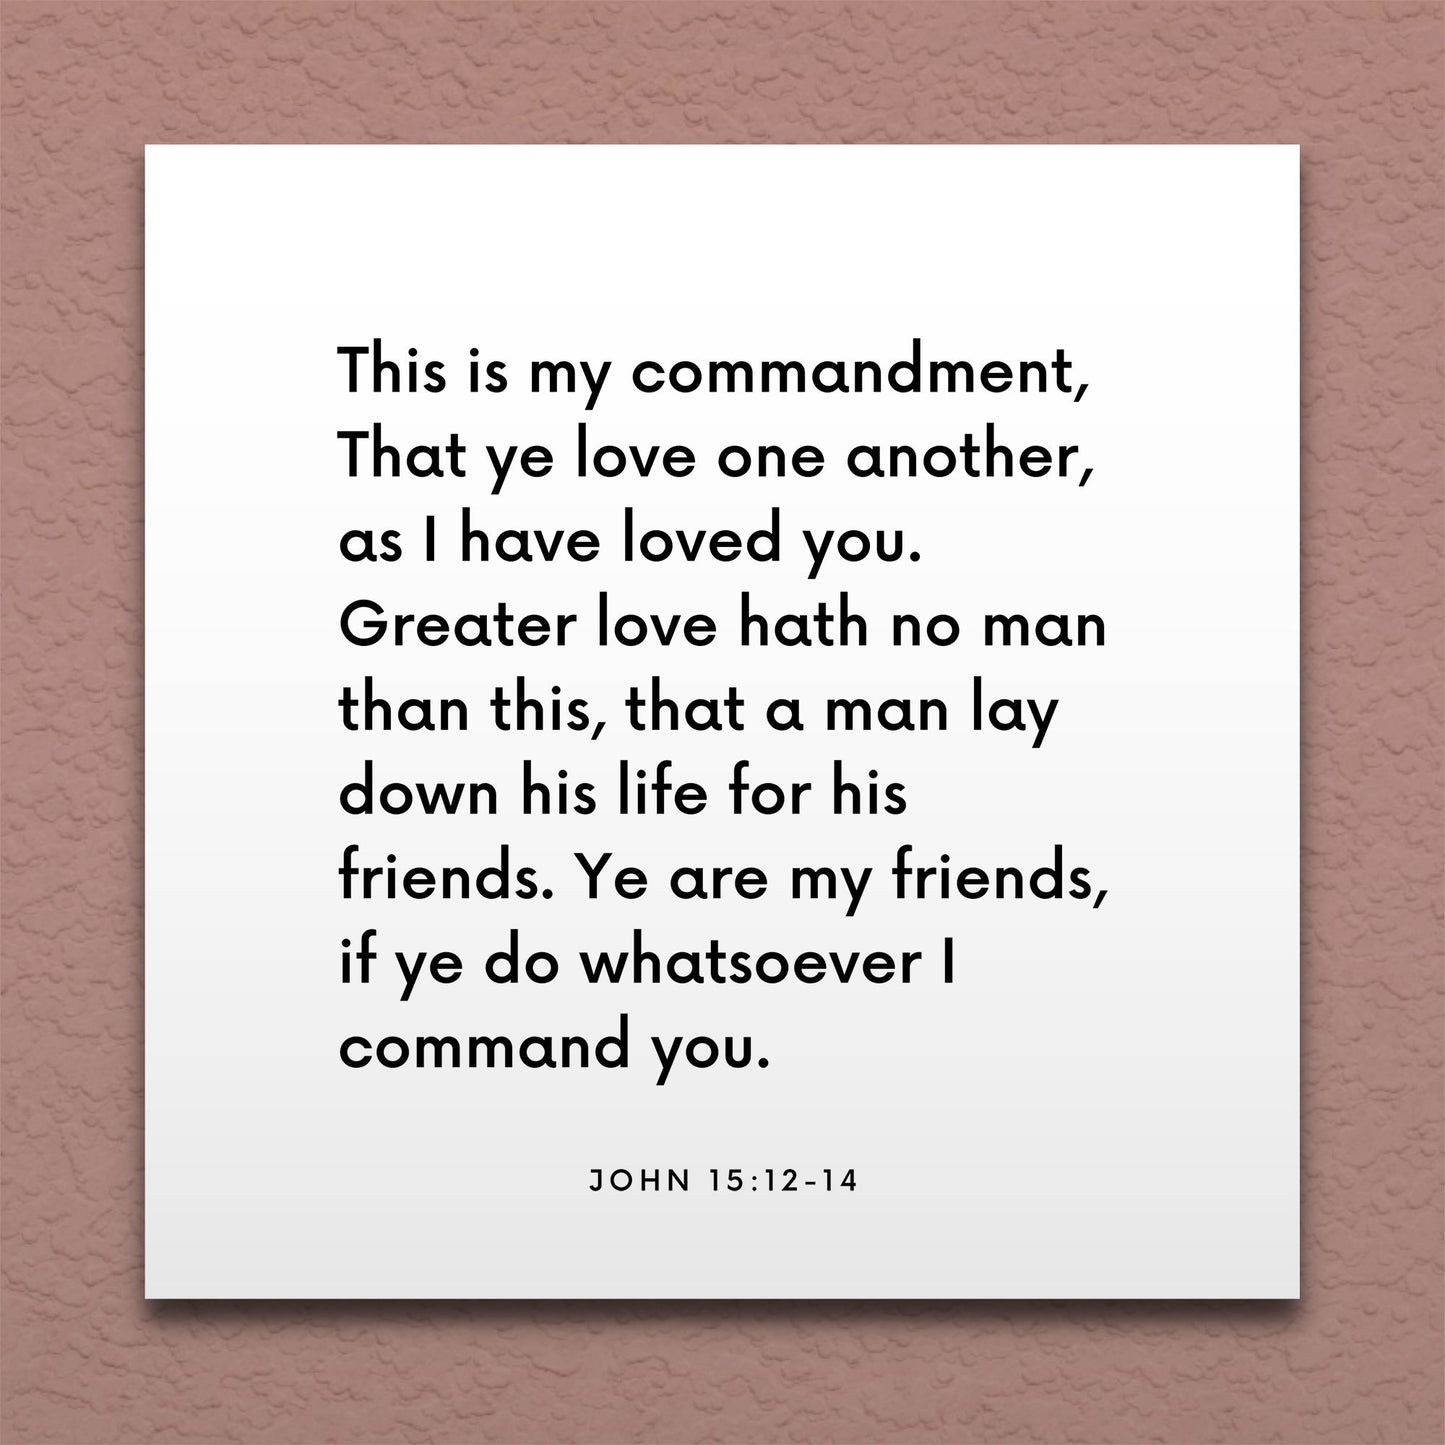 Wall-mounted scripture tile for John 15:12-14 - "This is my commandment, That ye love one another"